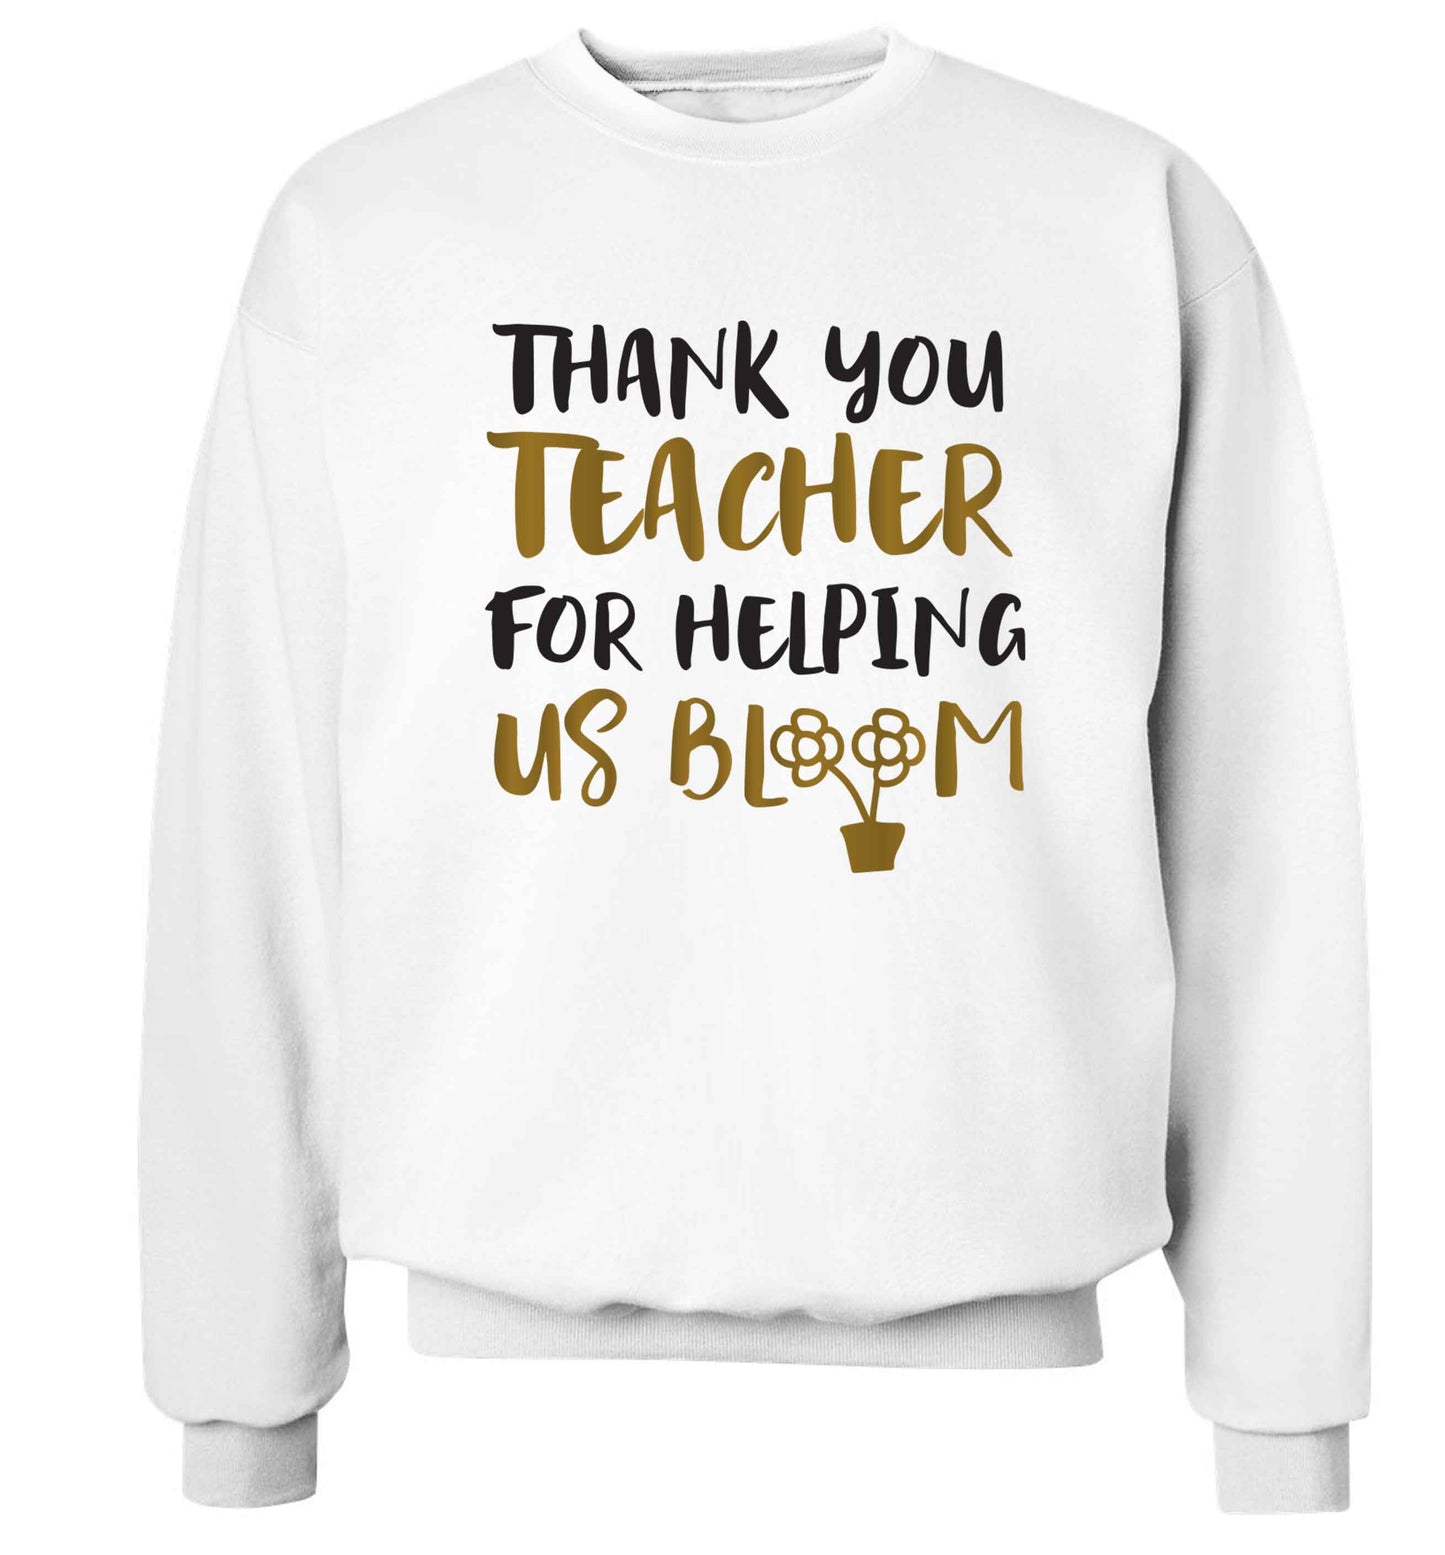 Thank you teacher for helping us bloom Adult's unisex white Sweater 2XL